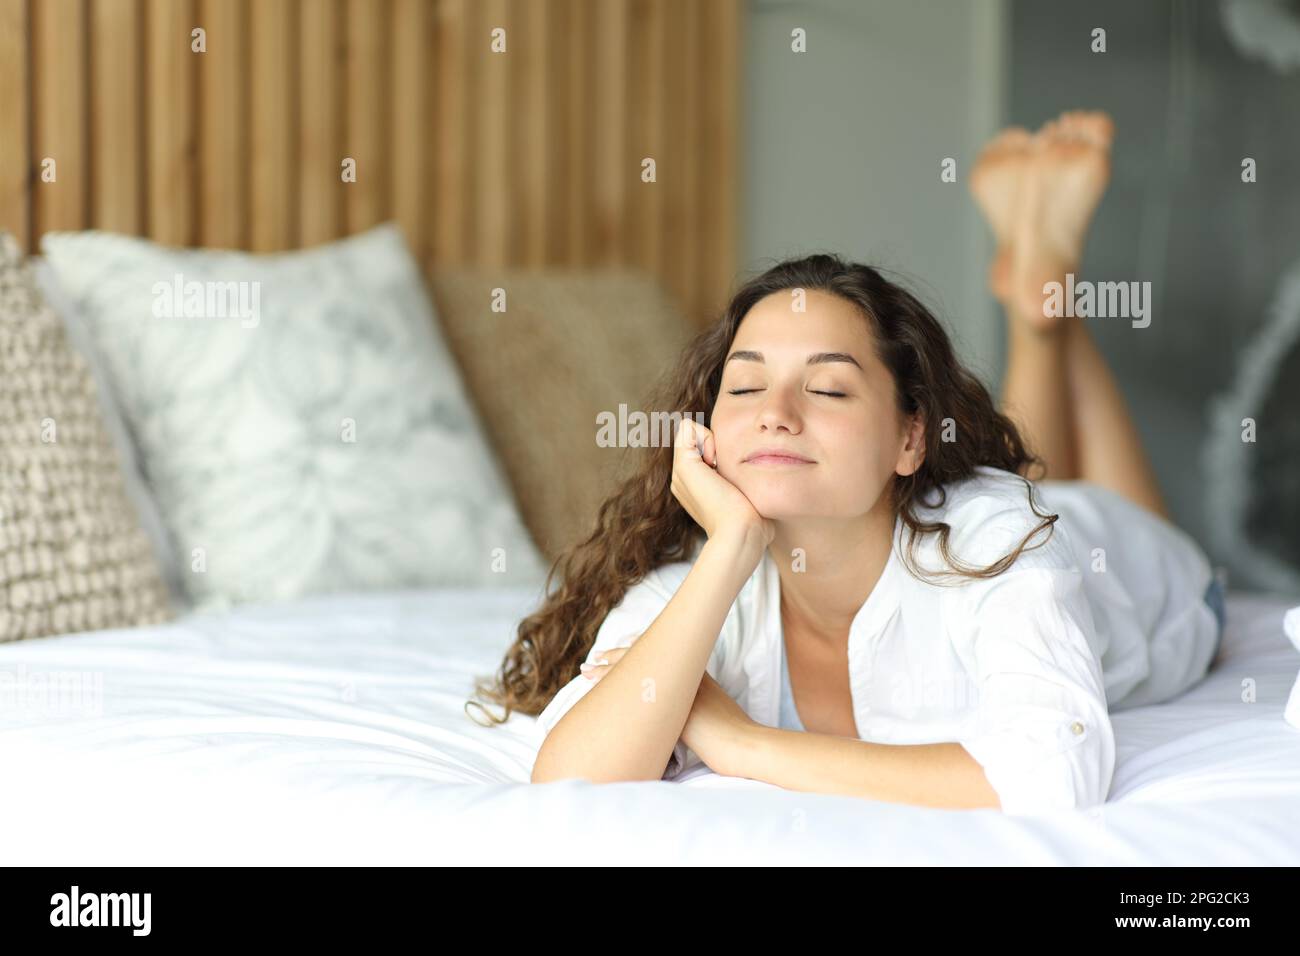 Happy beautiful woman lying on bed relaxing Stock Photo